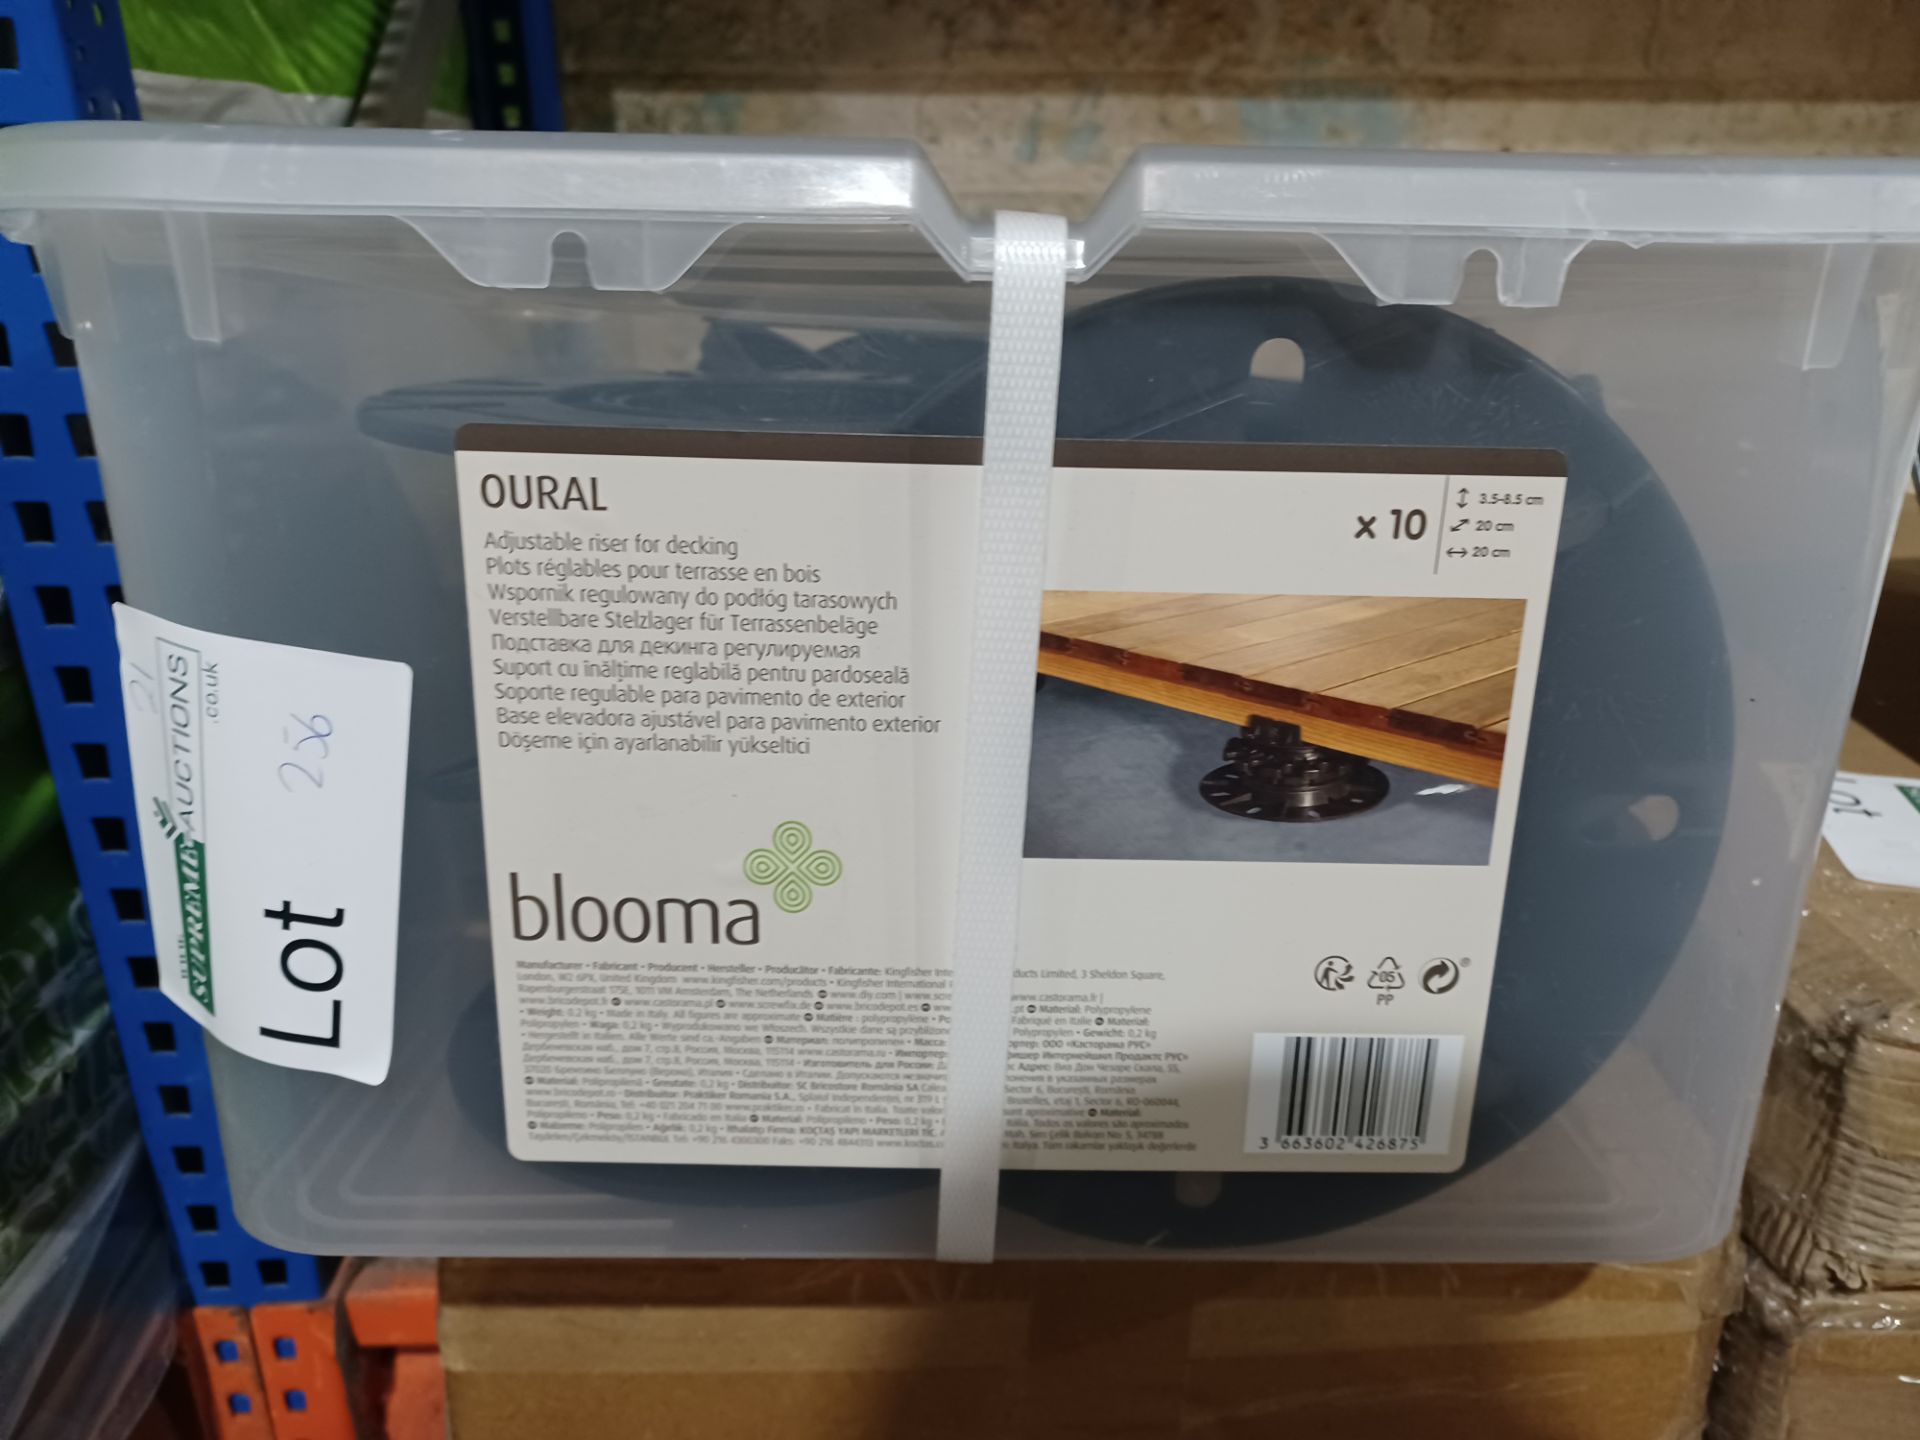 2 X Blooma Deck riser (L) 35mm, Pack of 10 - PCK